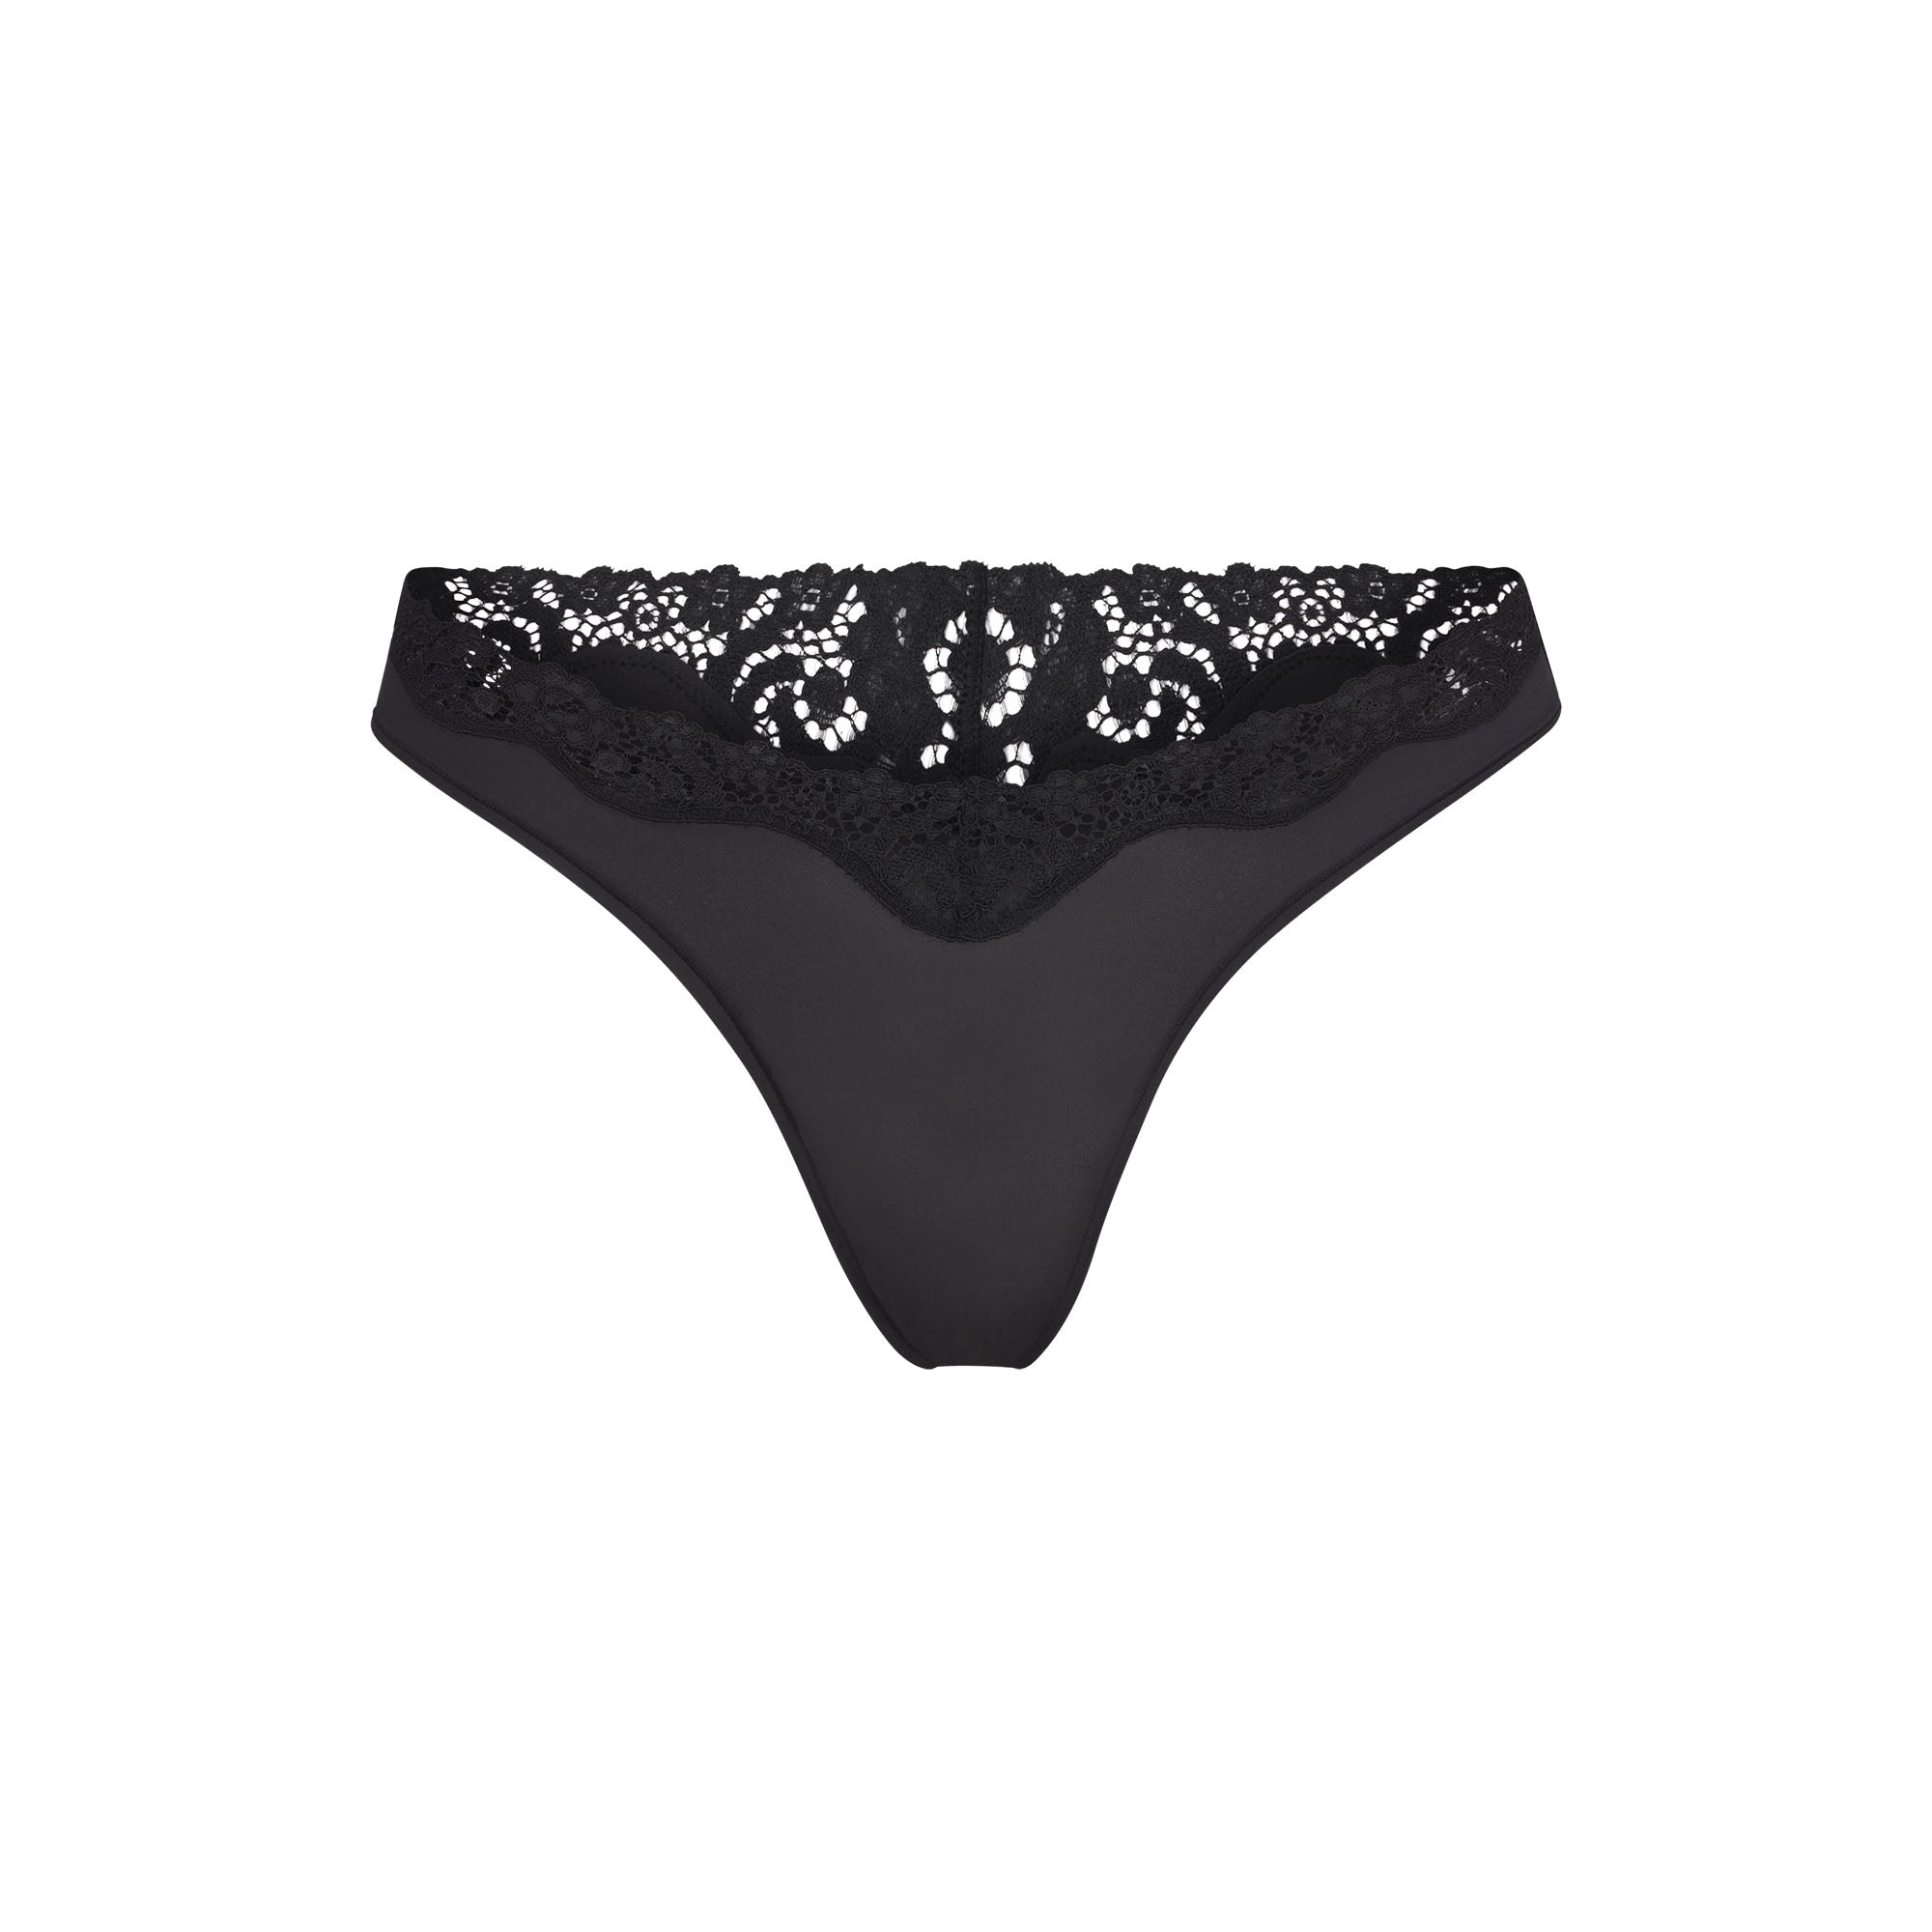 VS Victoria's Secret lace thongs underwear, size XS, new with tags